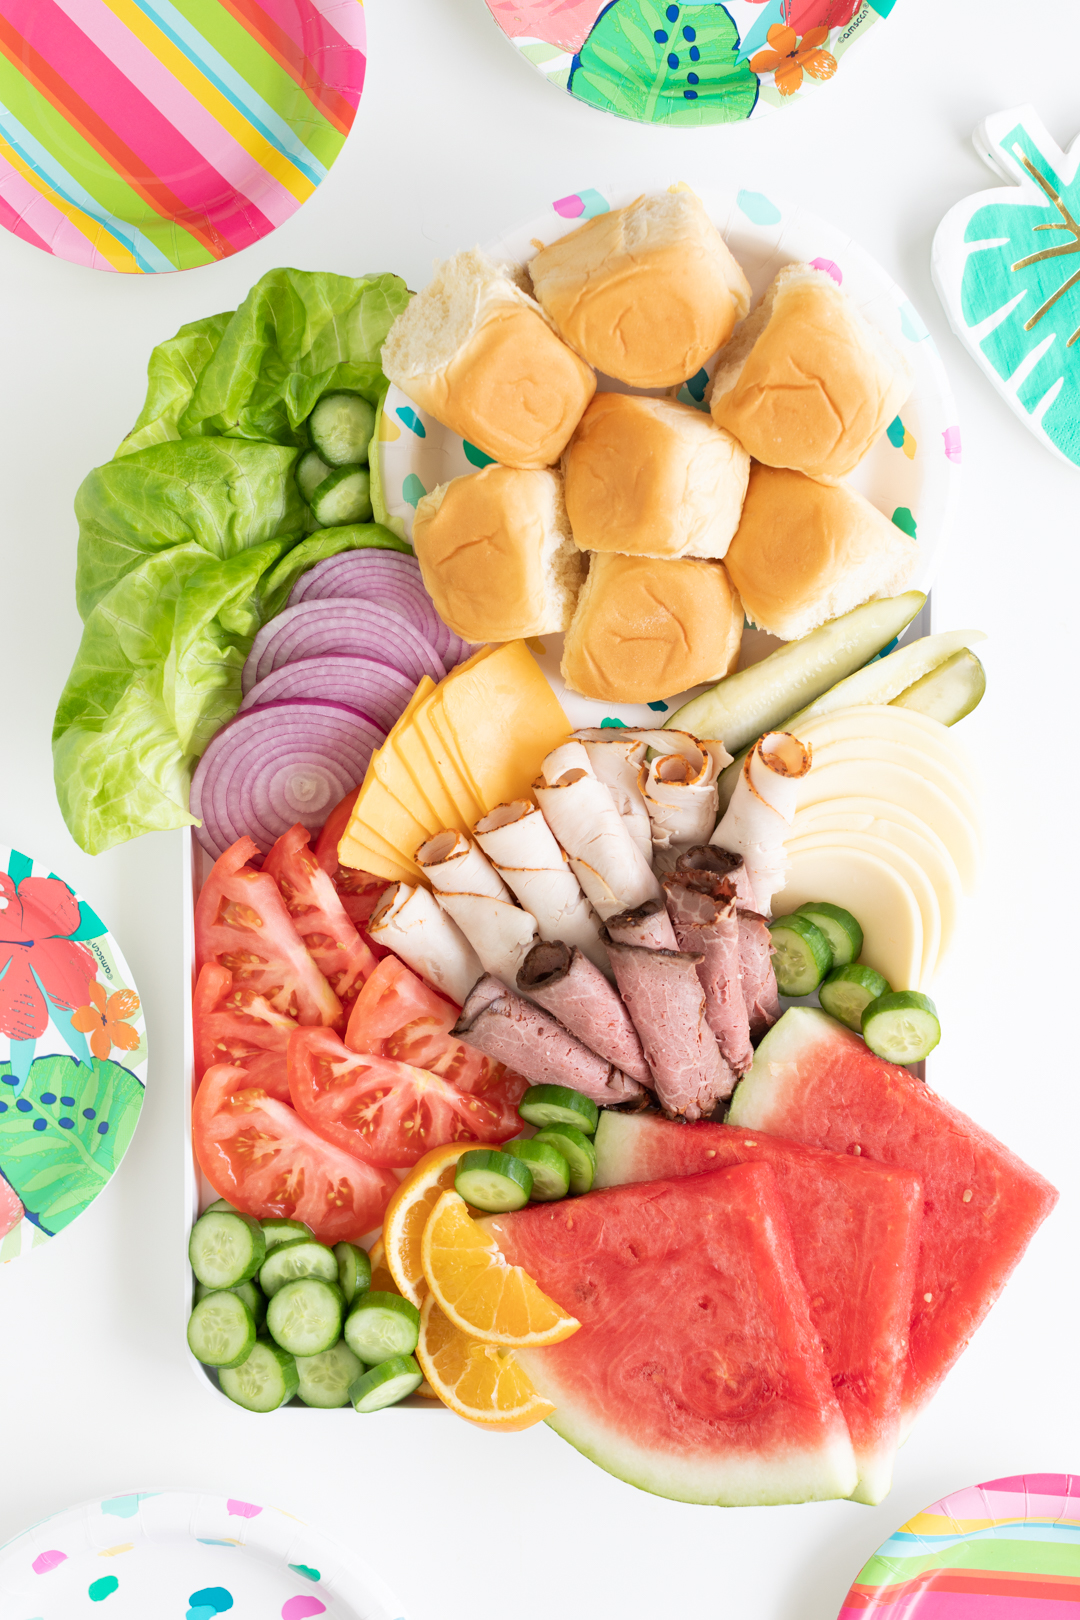 styled sandwich charcuterie board with lettuce, tomato slices, lunch meats, cheeses and fruits with a variety of colorful paper plates surrounding it.